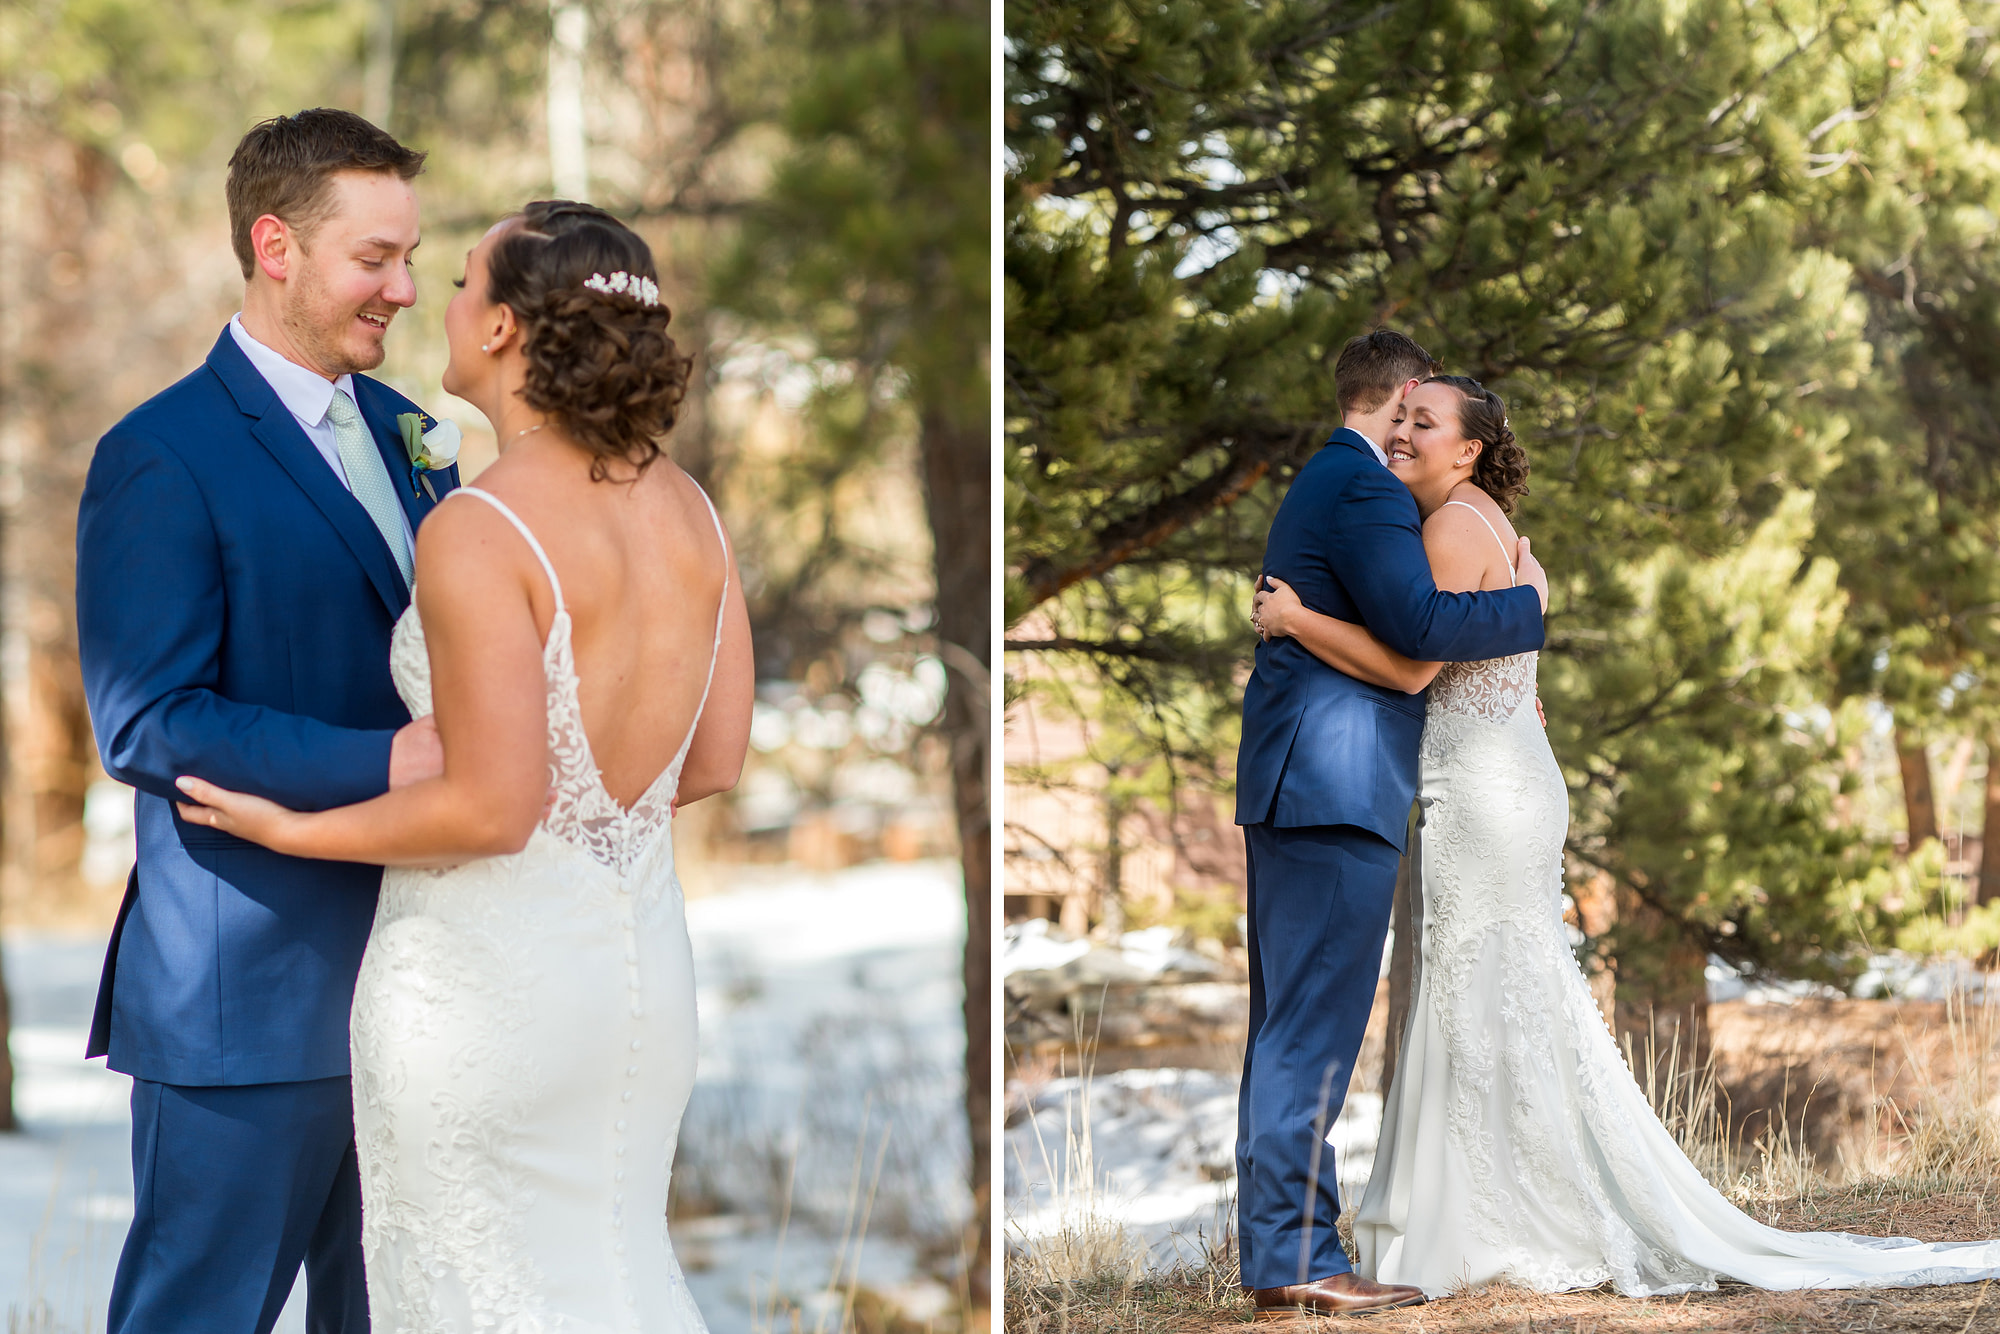 The bride and groom first look during their YMCA of the Rockies wedding in Estes Park, Colorado.